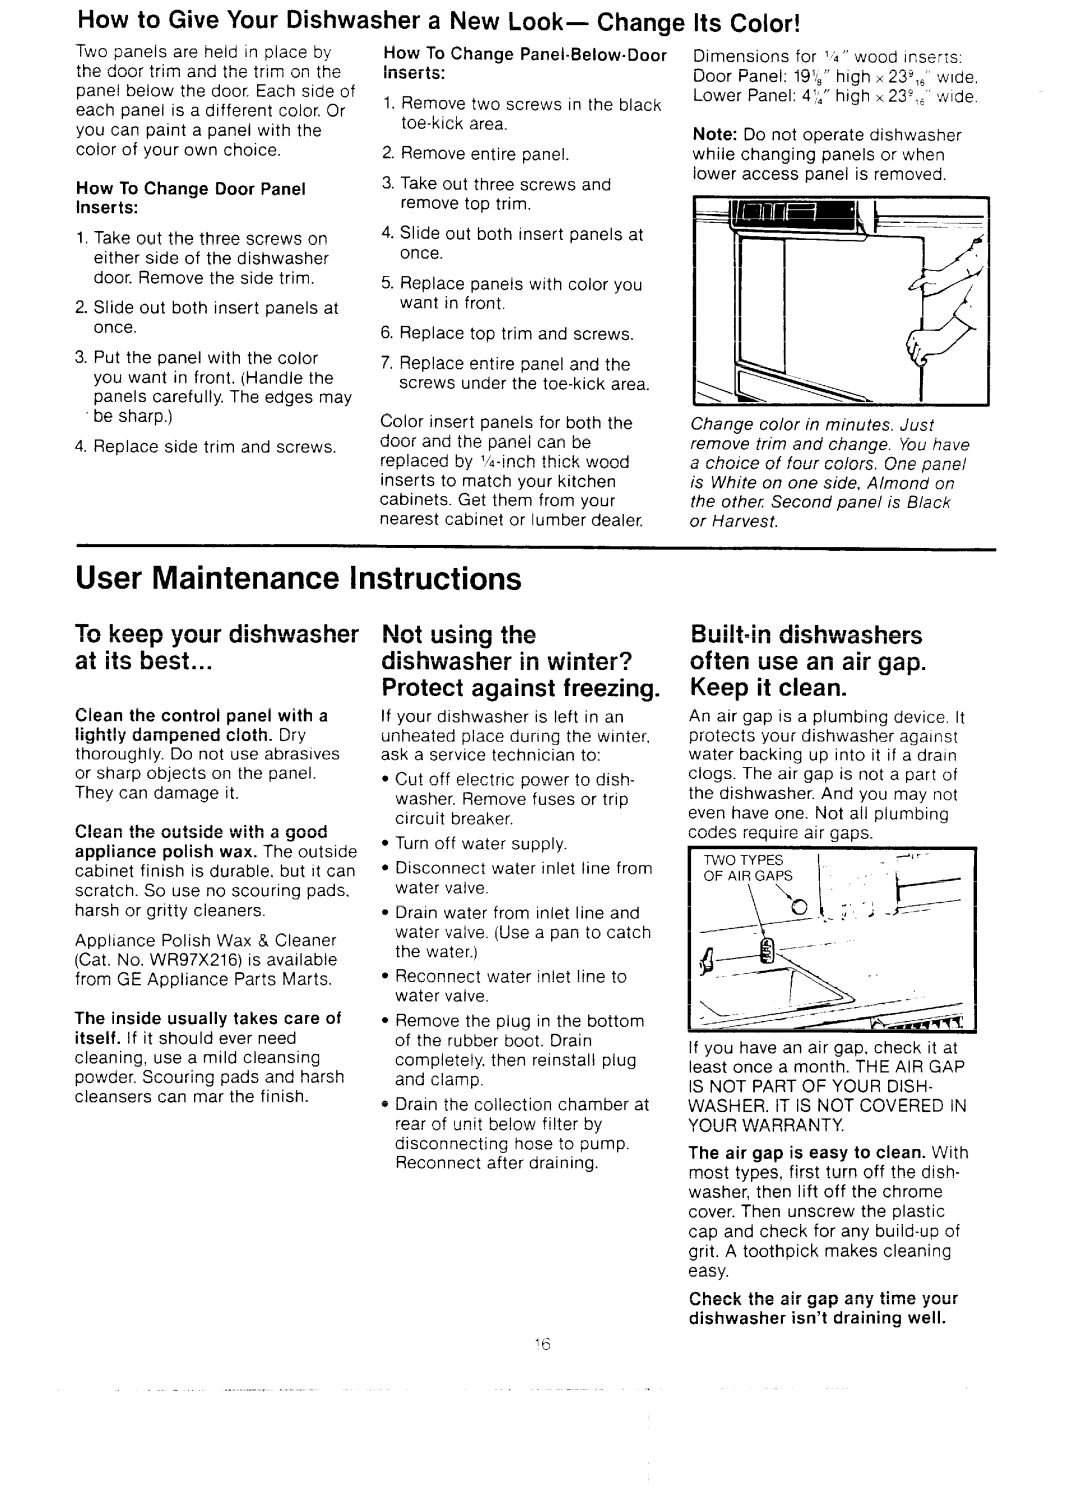 GE GSD2600D manual User Maintenance Instructions, How to Give Your Dishwasher a New Look- Change, Its Color 